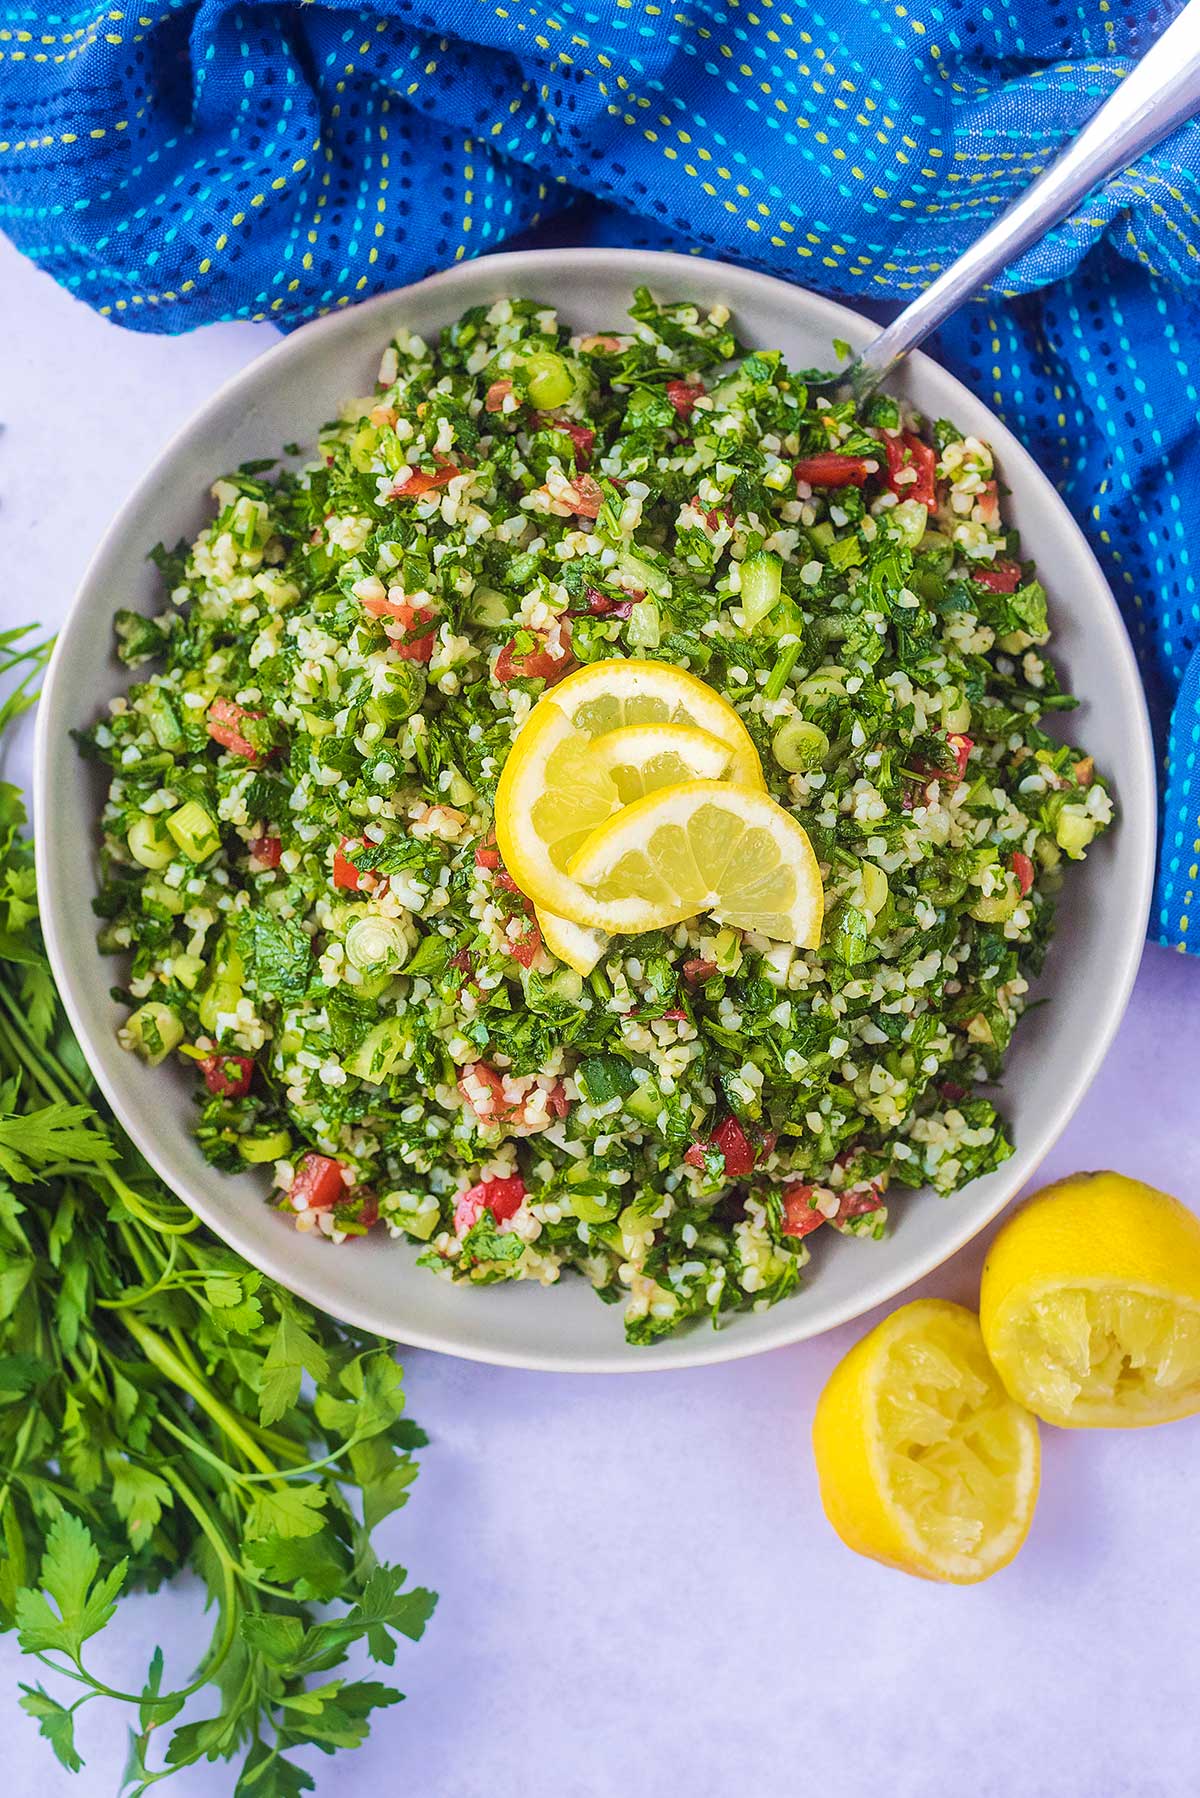 A bowl of tabbouleh with lemon slices on top.